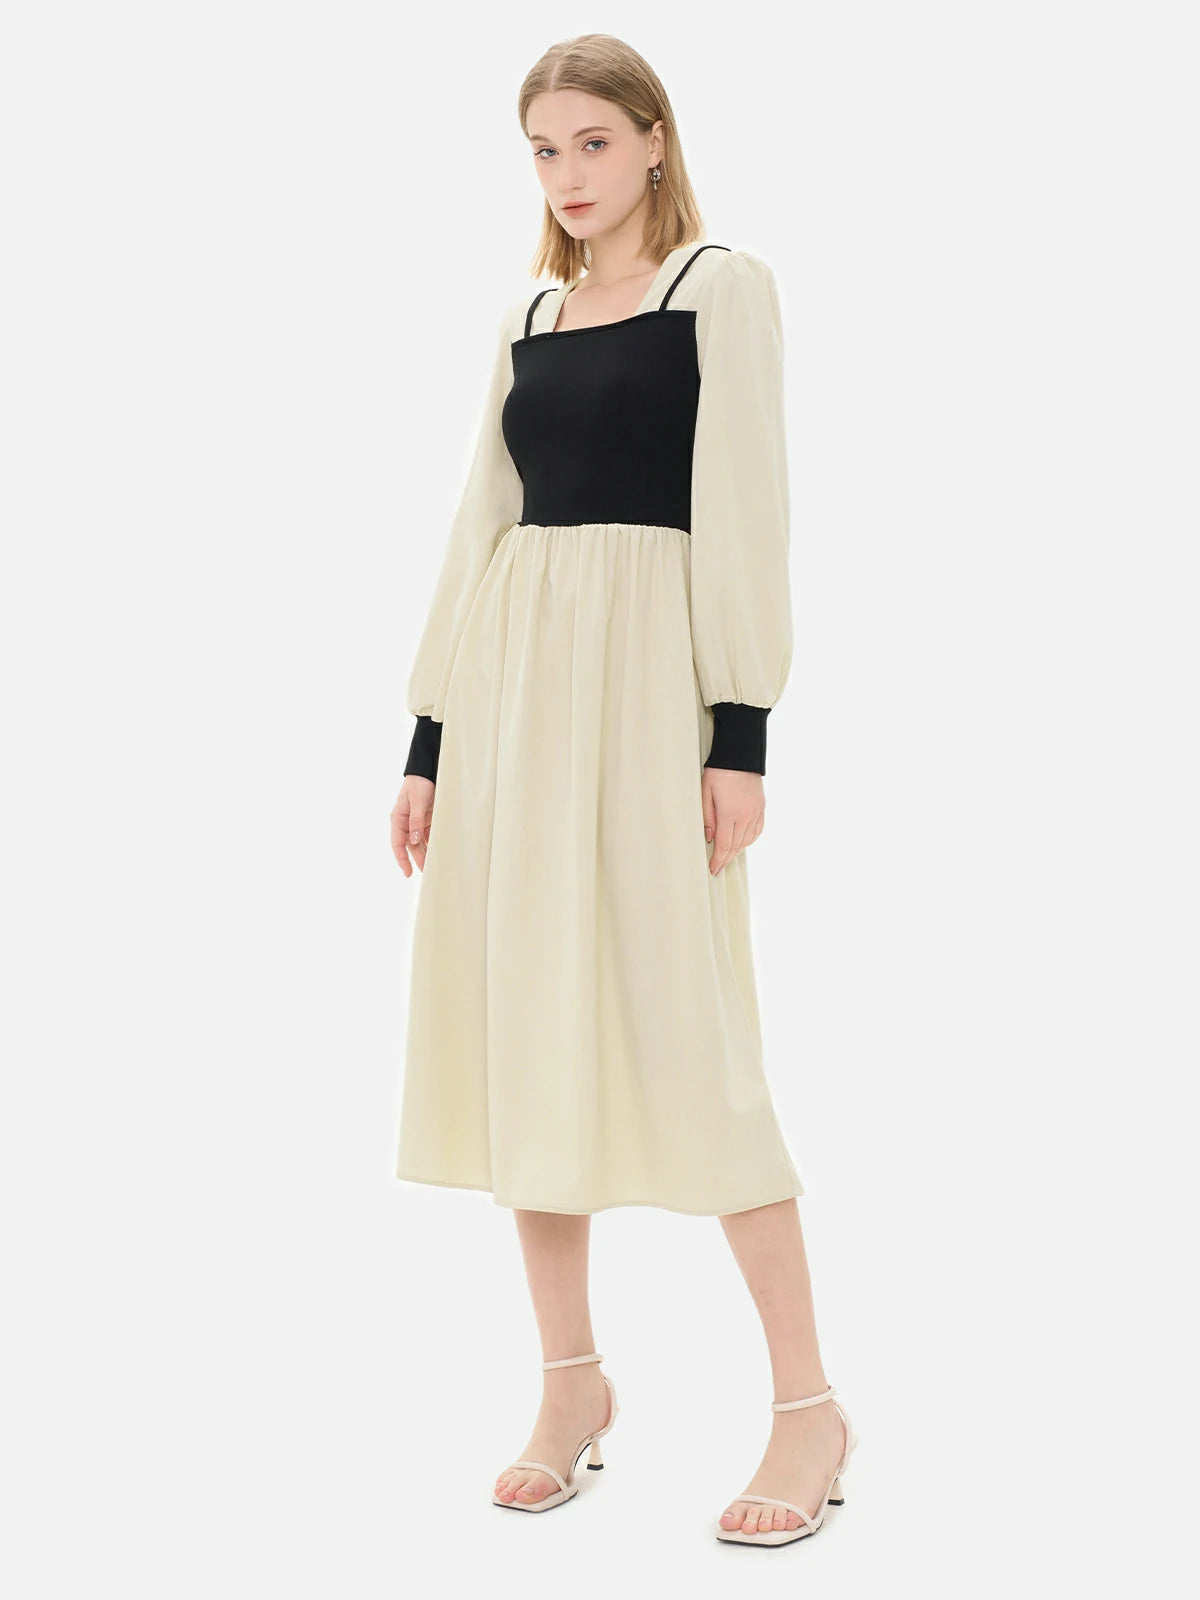 Square-neck dress with black sleeves and khaki skirt